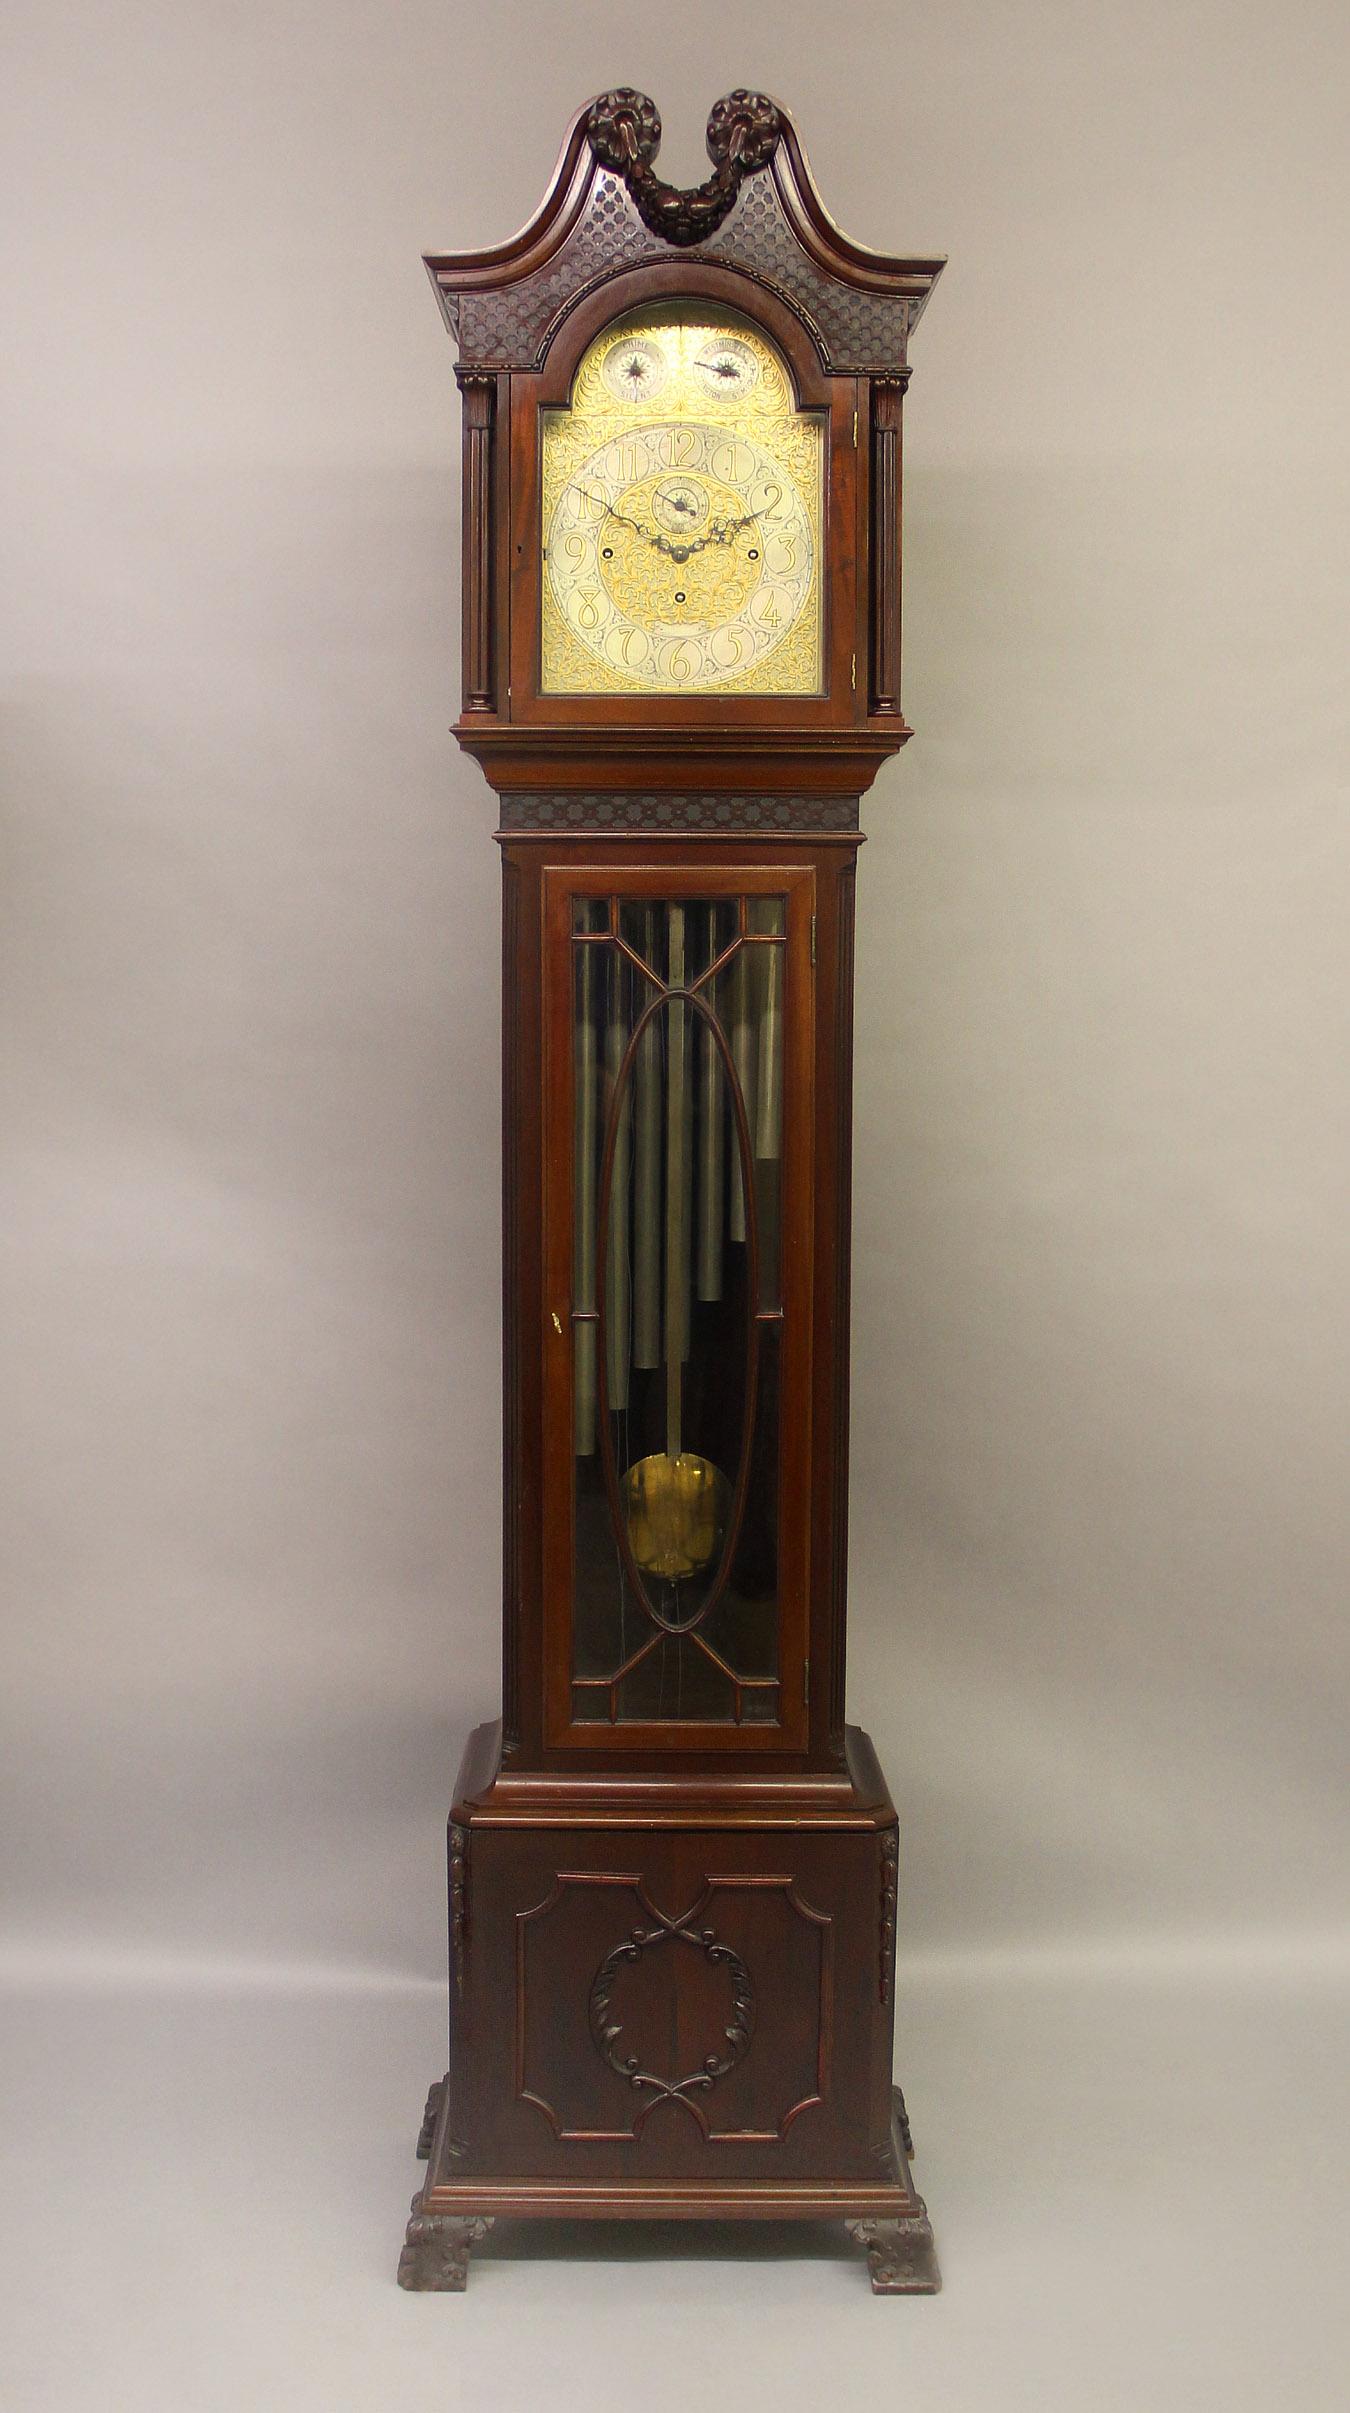 A Nice Late 19th Century English Carved Nine Tube Longcase Grandfather Clock

The clock with an eight day movement and chiming on nine tubes. The very elaborate designed face with Arabic Numerals enclosing a subsidiary seconds dial in the center, a